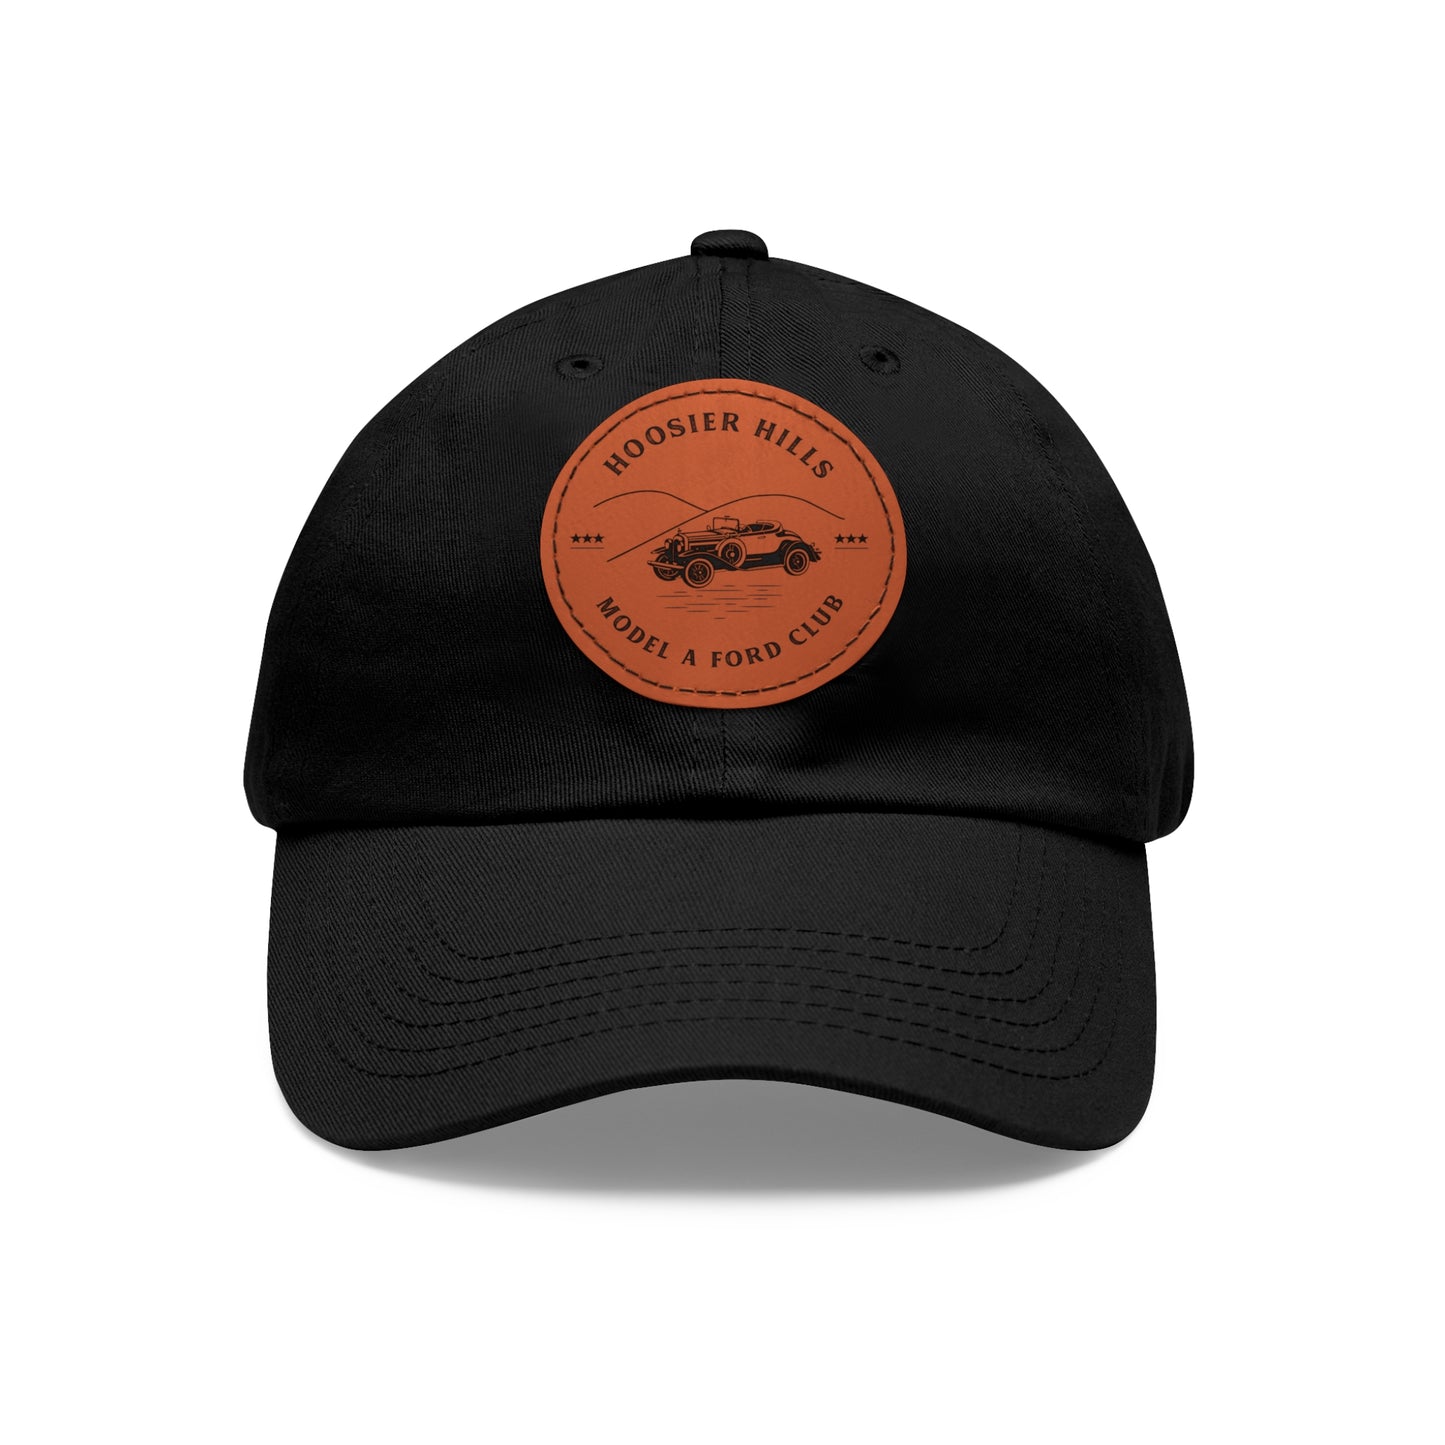 Hoosier Hill Model A Ford Club Dad Hat with Leather Patch (Round)